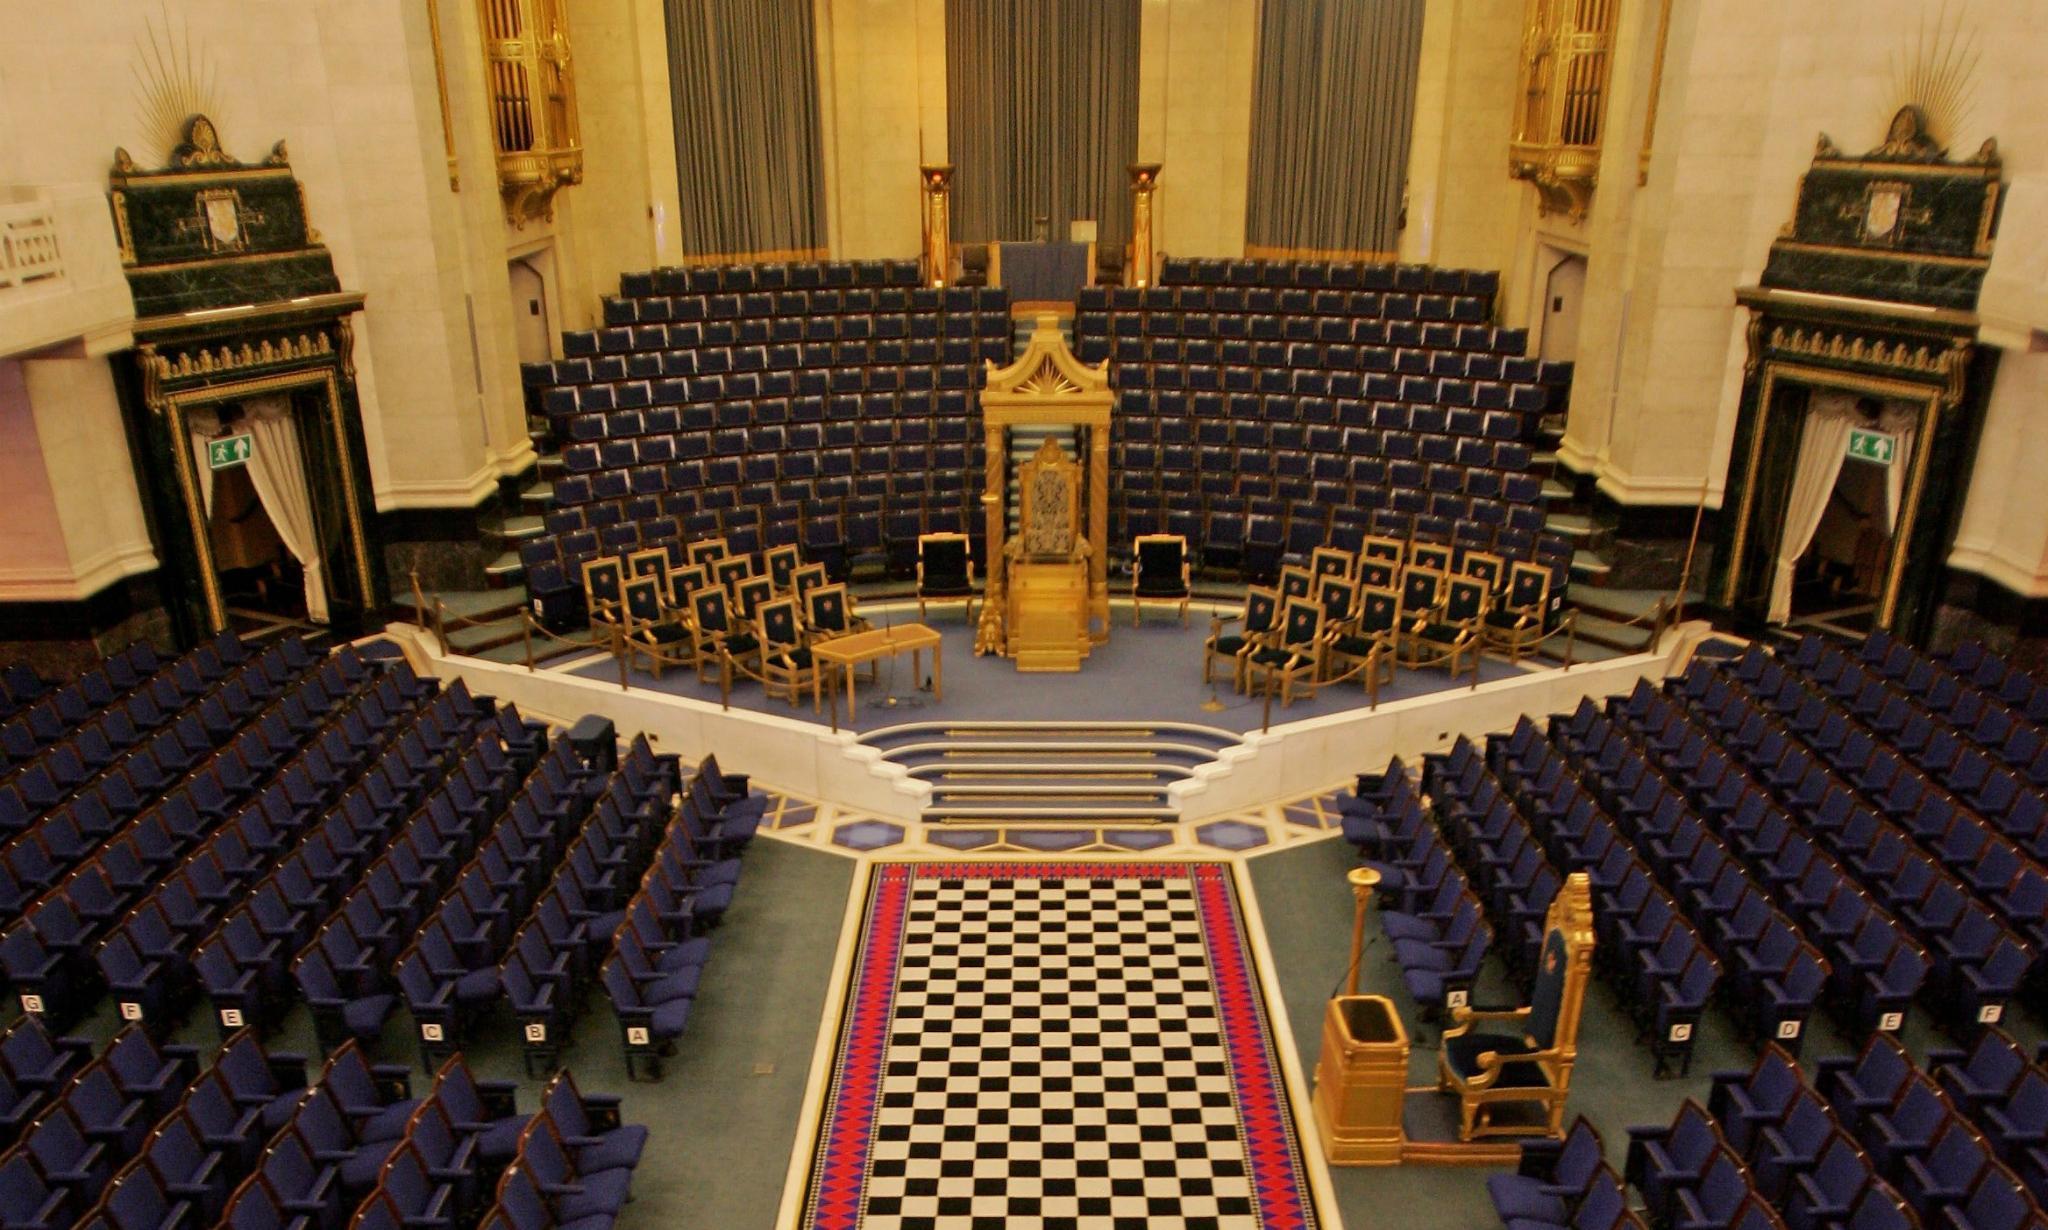 A general view of the Grand Temple inside London’s Freemasons’ Hall